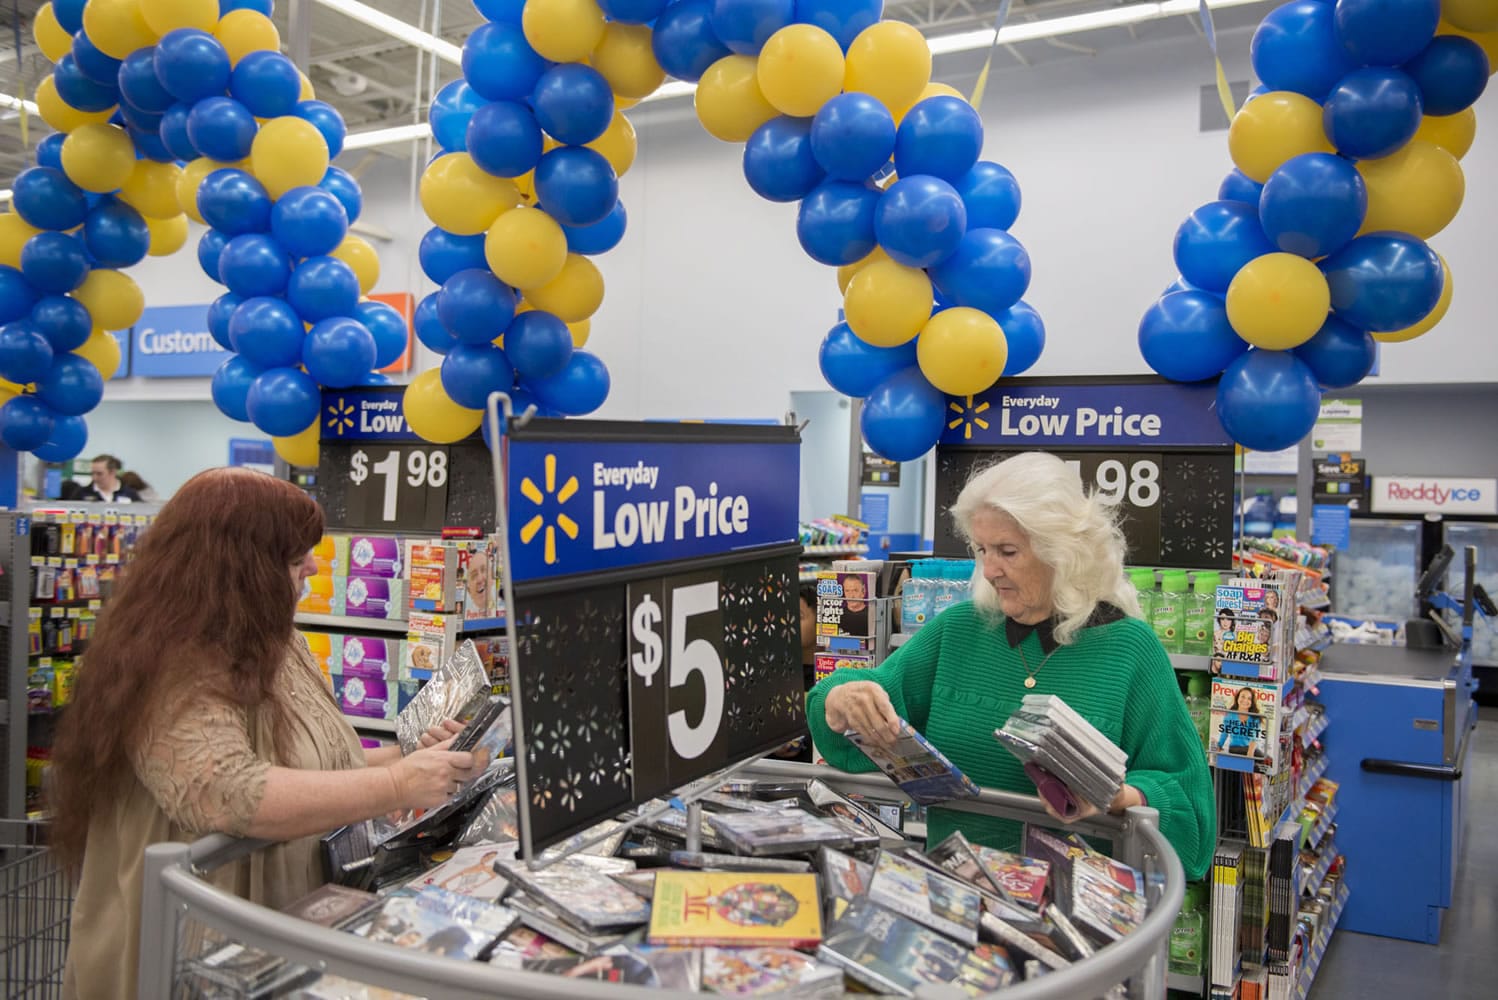 Bobbi Pratt of Orchards, left, sifts through the variety of discounted movies with her mom, Bernice Hayes, also of Orchards on Sept. 23 at the new Wal-Mart.